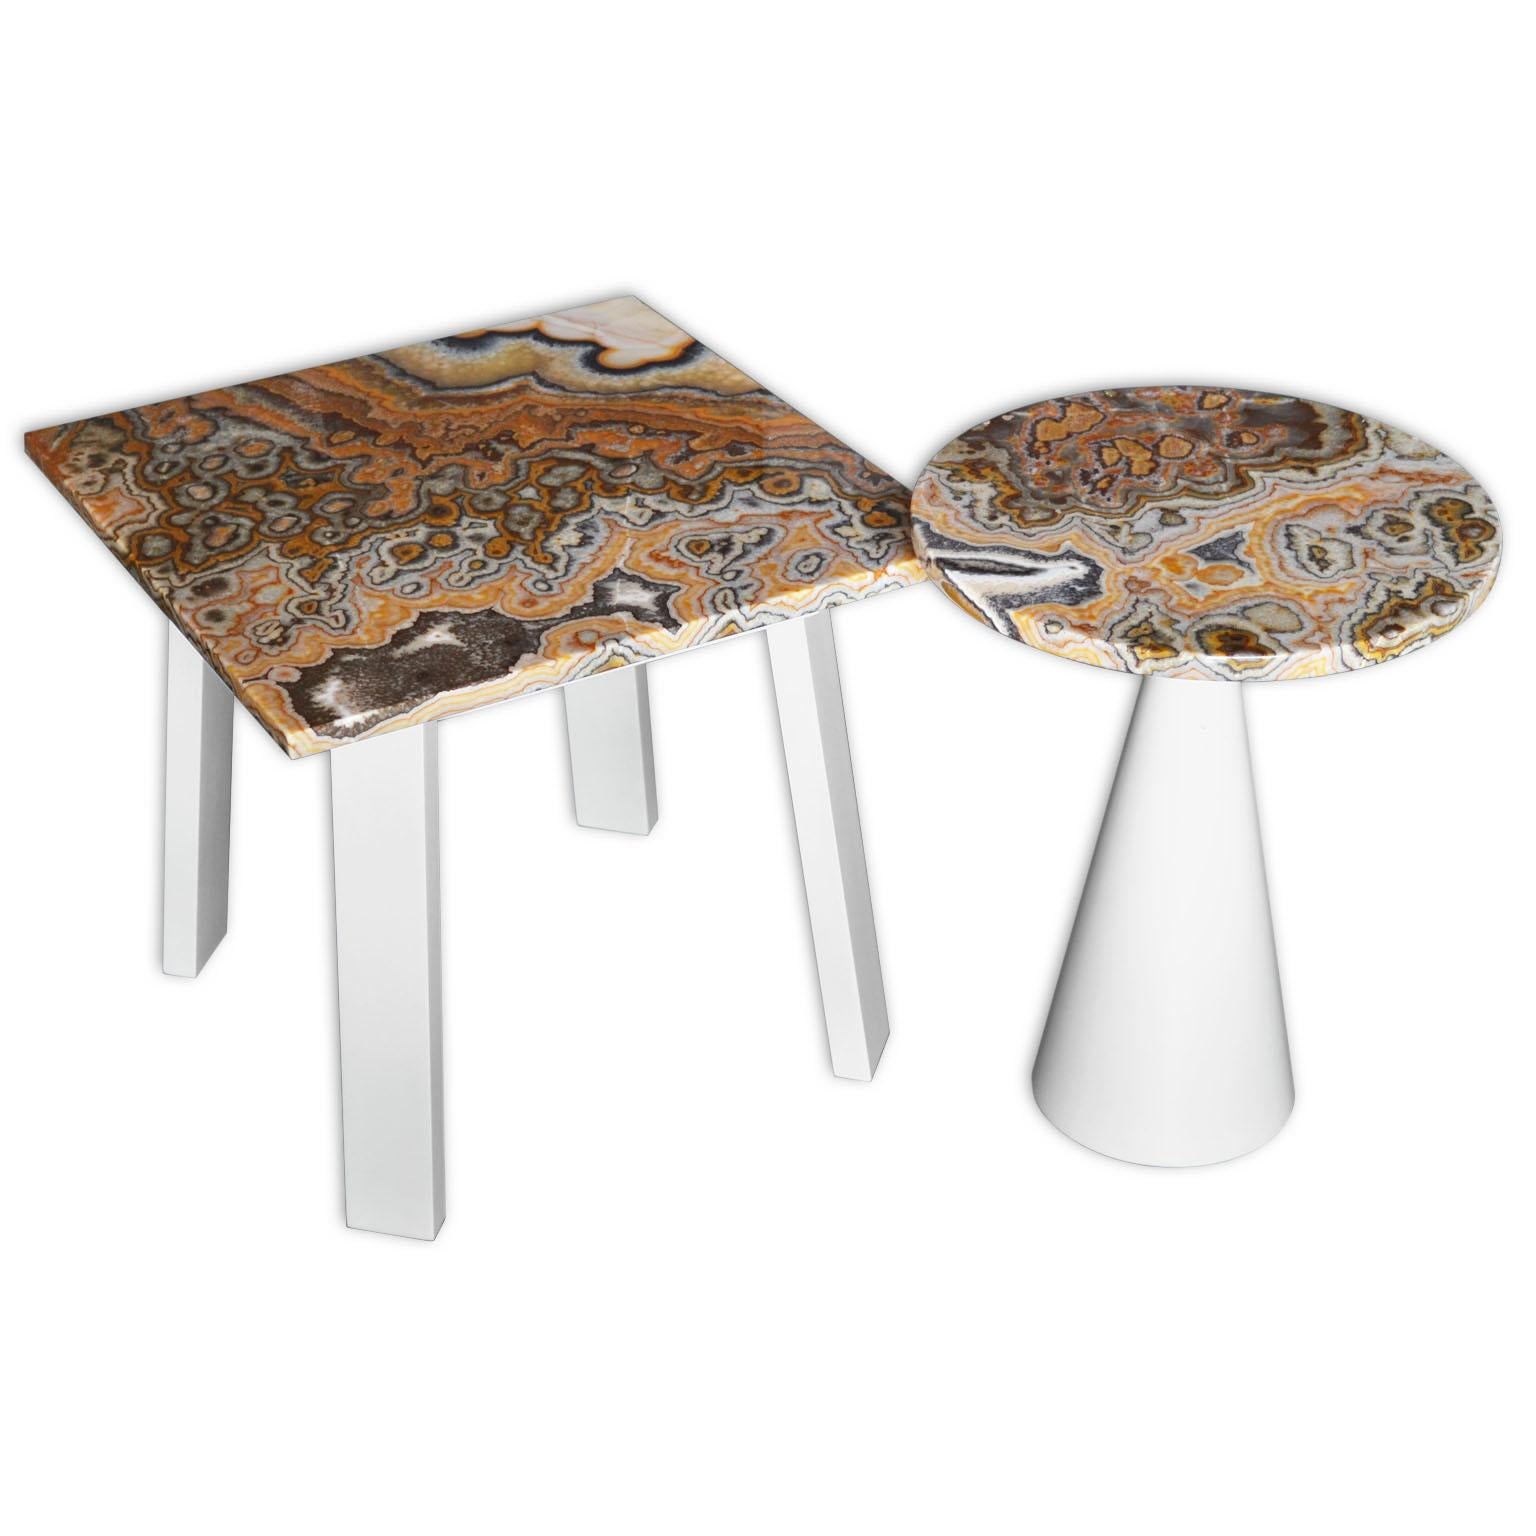 Cupioli produces a large range of tables and 